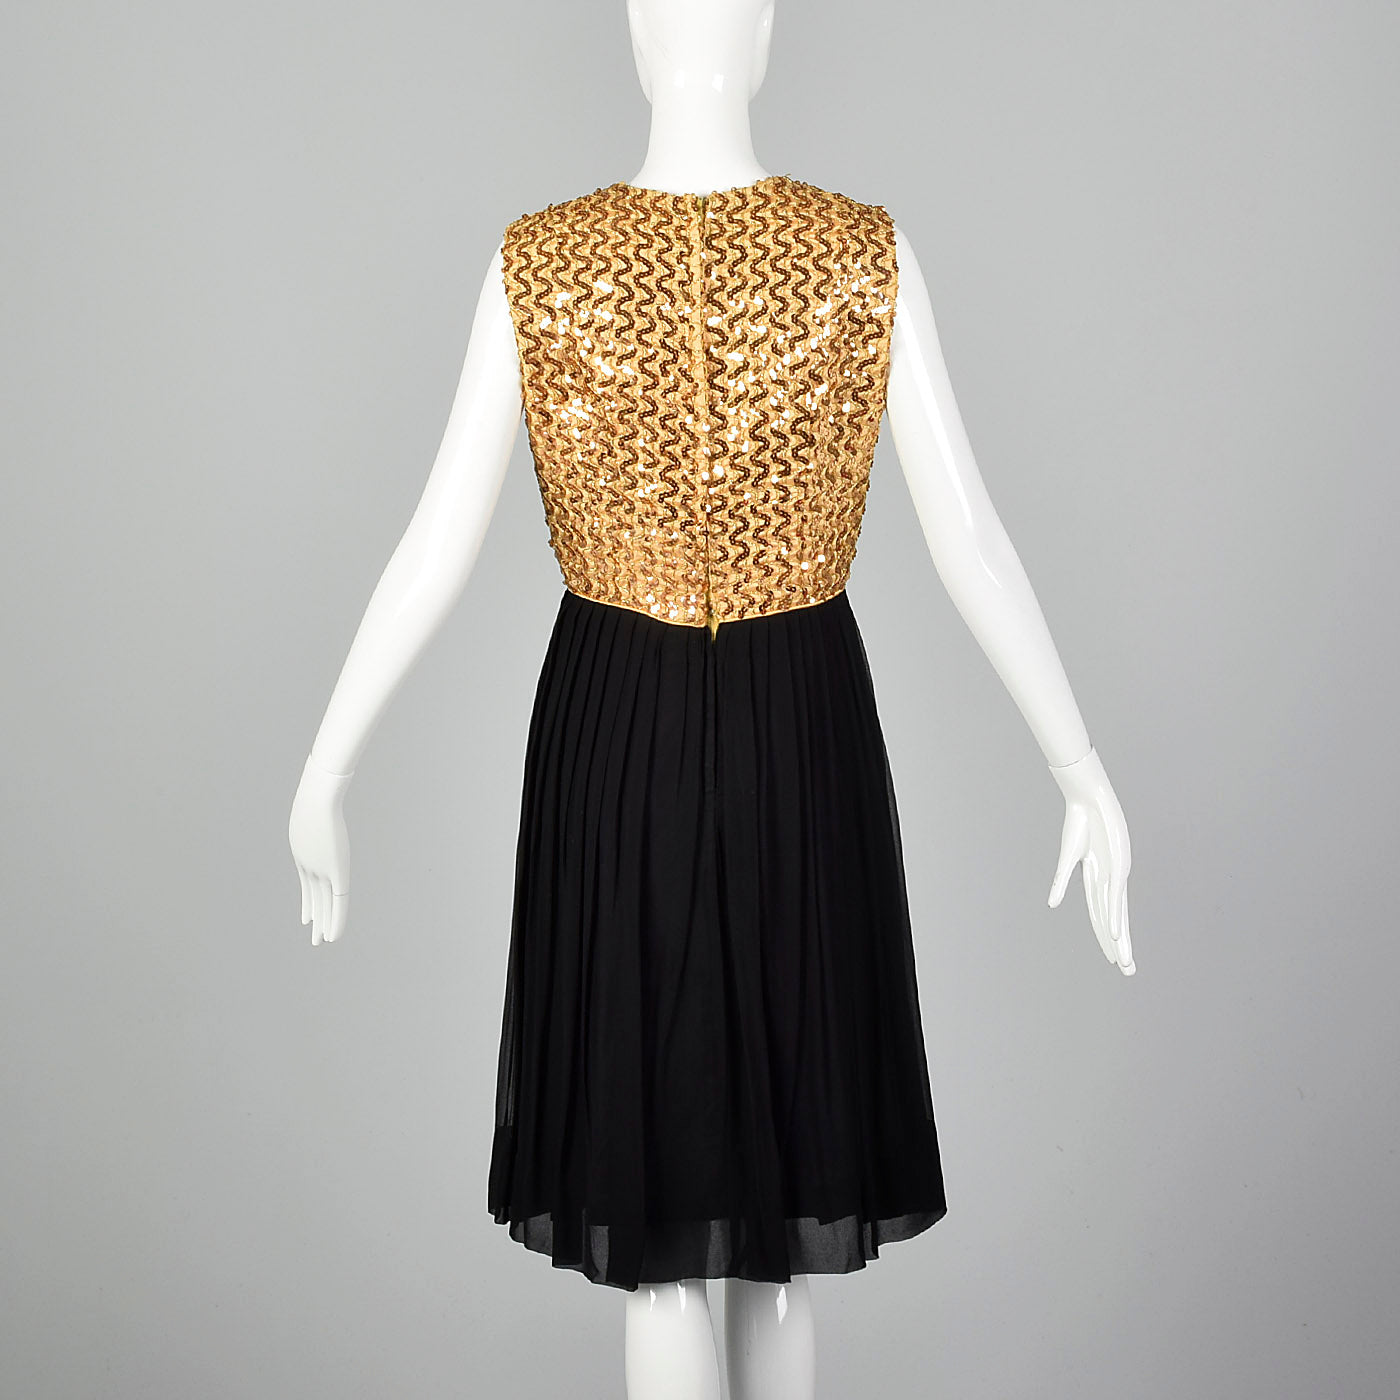 1960s Party Dress with Gold Sequin Bodice